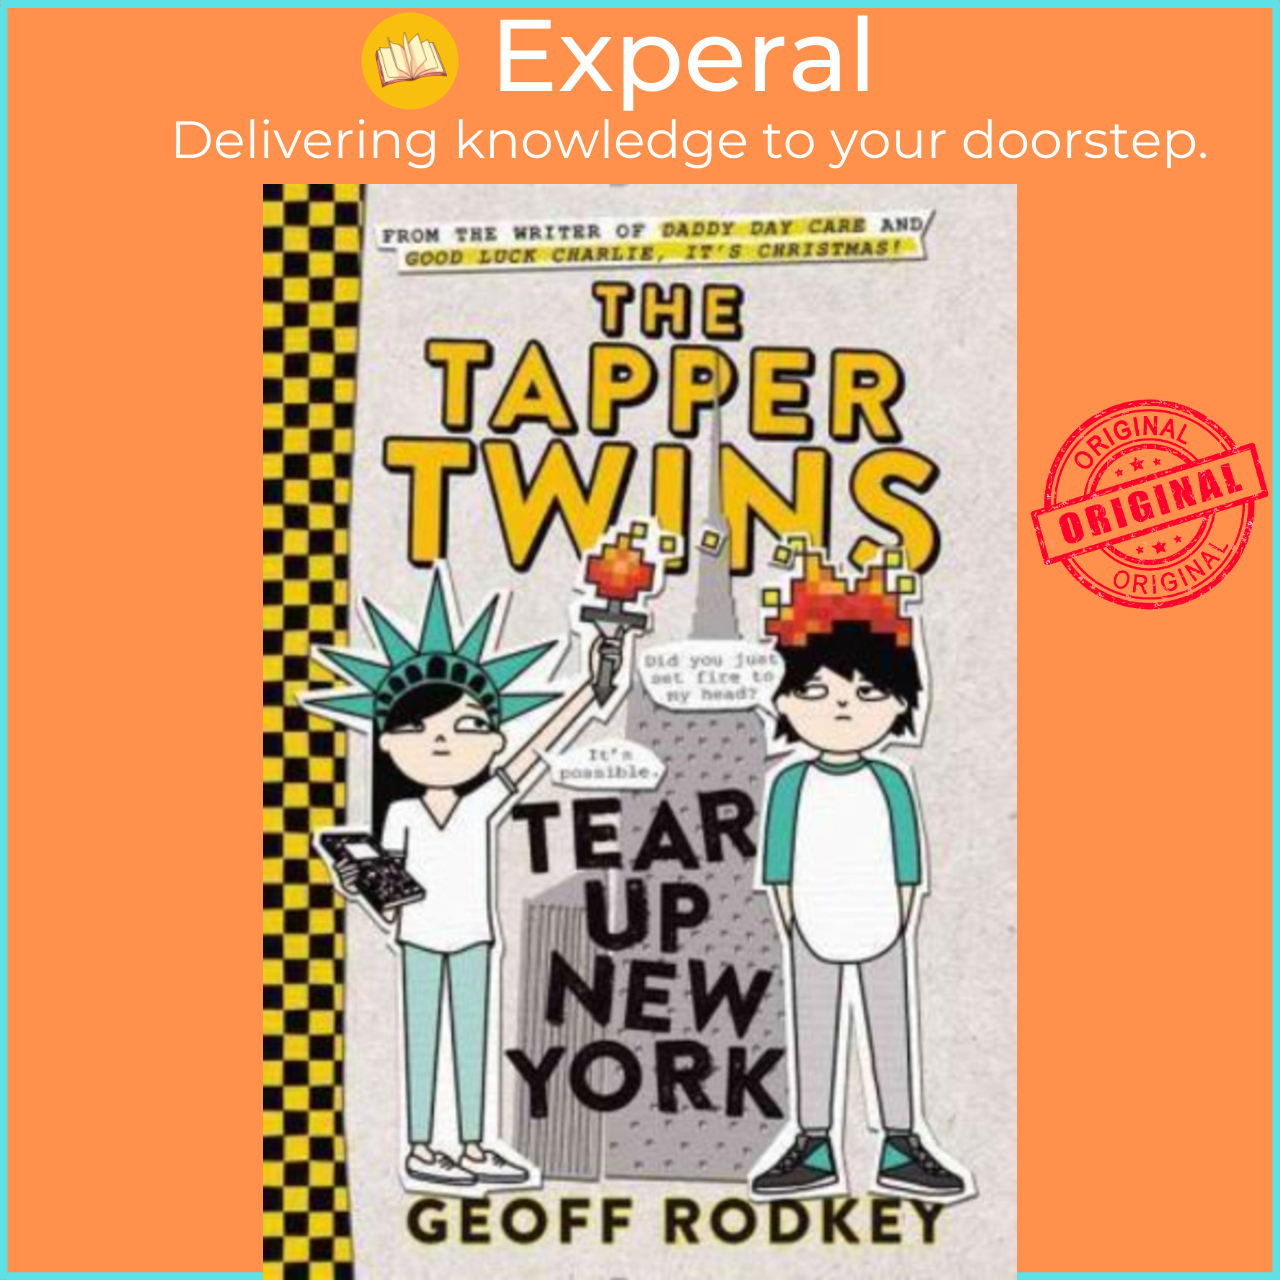 The Tapper Twins Tear Up New York by Geoff Rodkey (US edition, paperback) |  Lazada Singapore